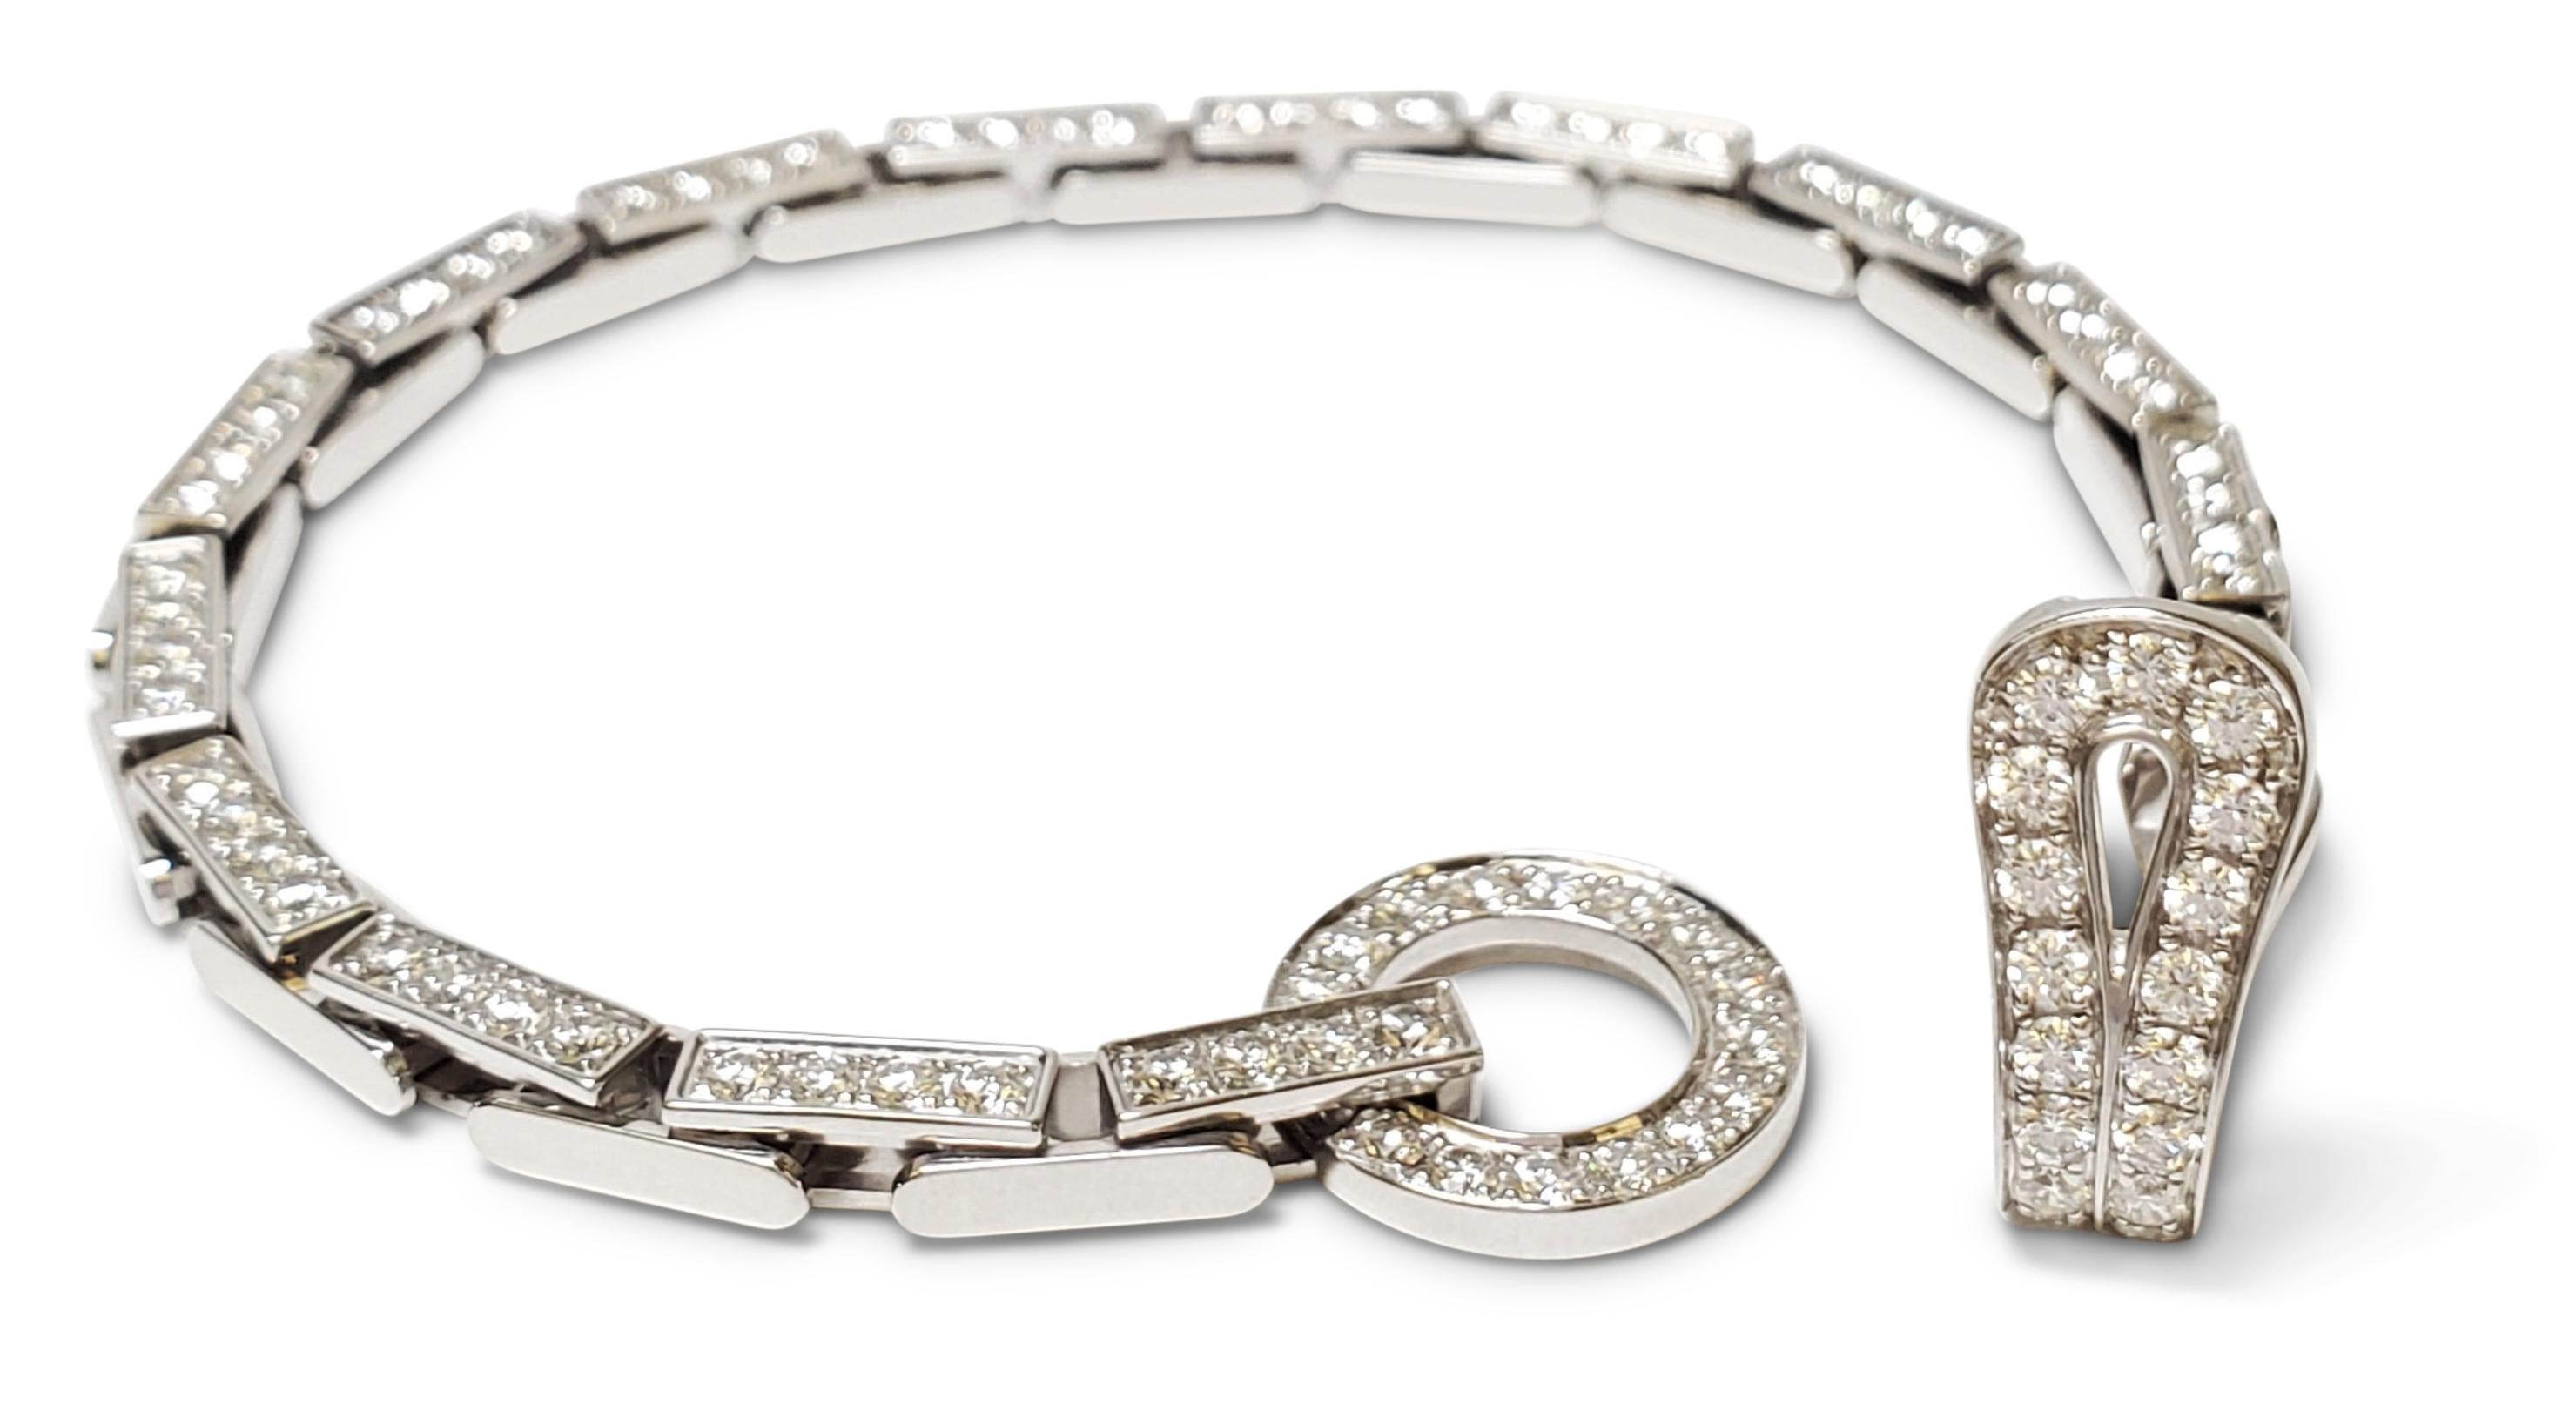 Authentic Cartier Agrafe bracelet comprised of brickwork links and completed with hook and eye closure. Both the clasp and links are set with a total of approx. 3.25 carats of round brilliant cut diamonds (E-F color, VS clarity). Signed Cartier,